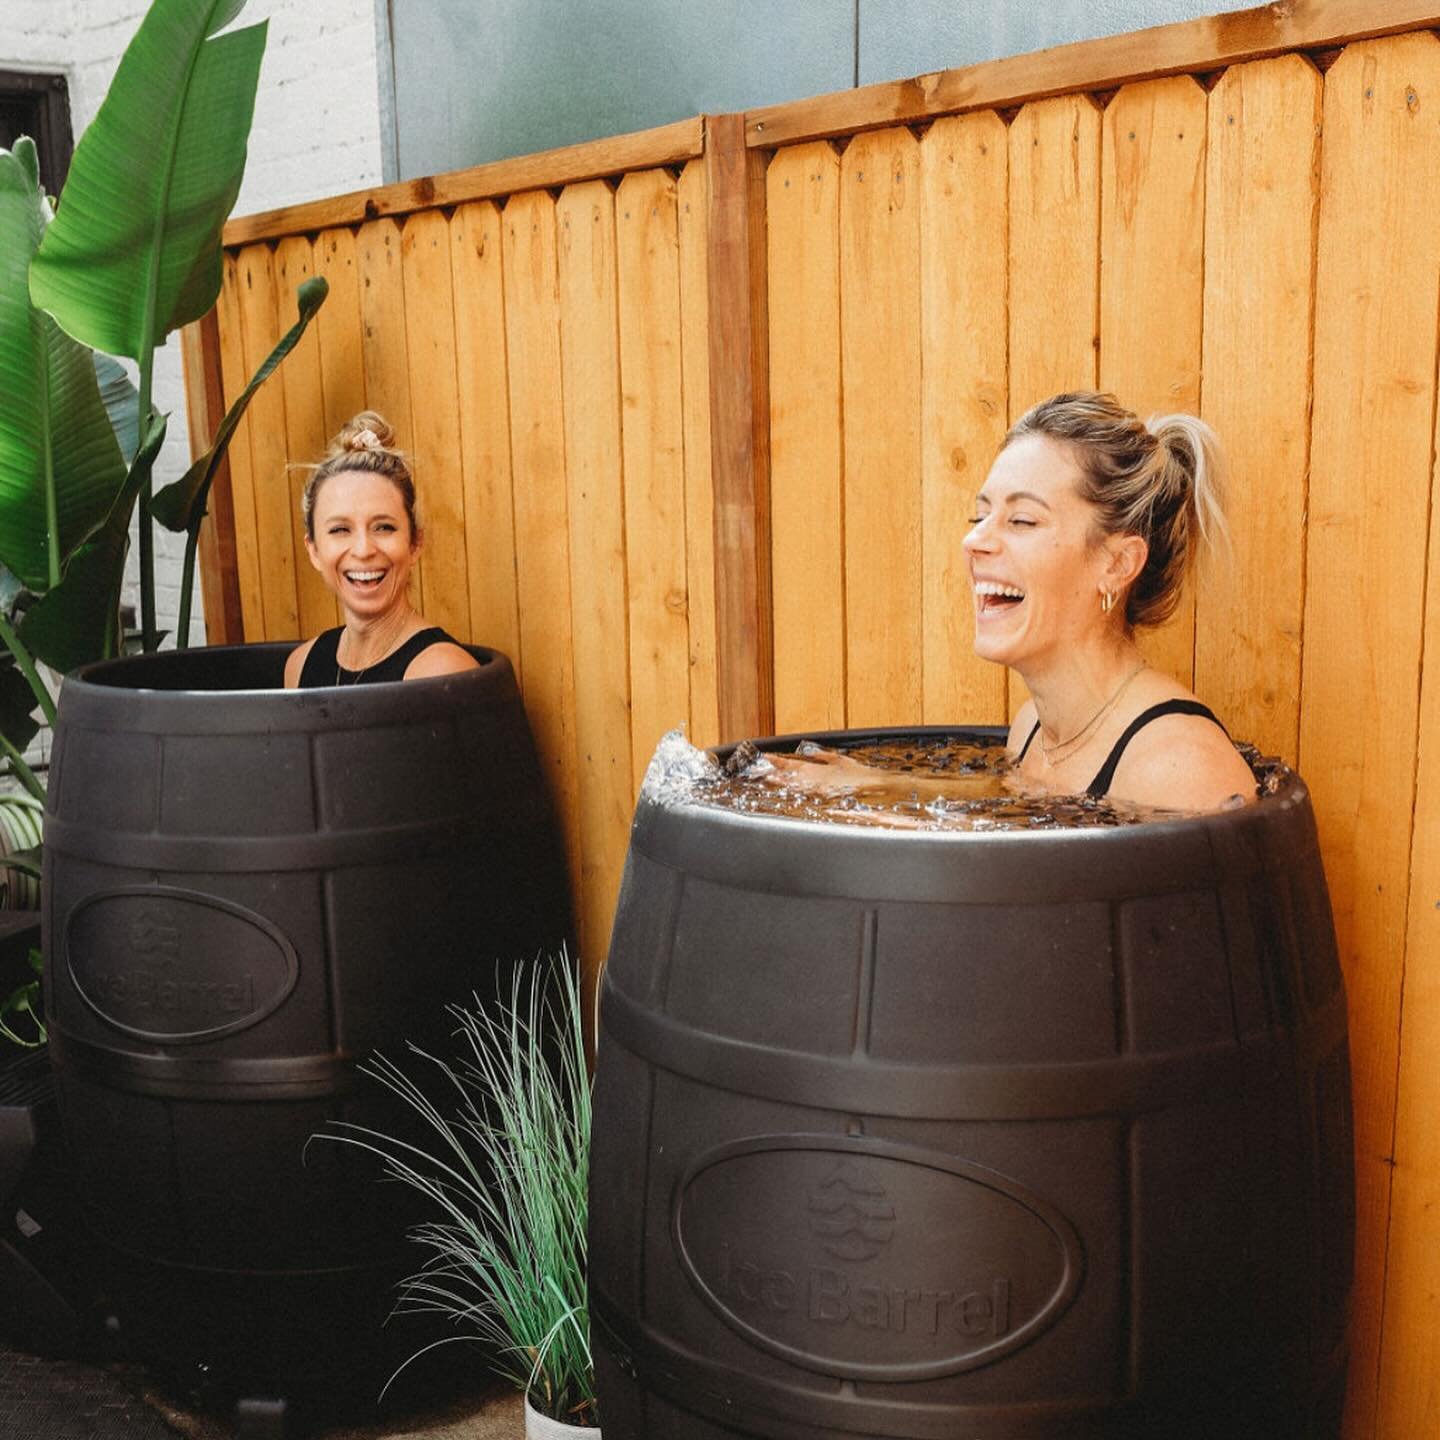 Join us THIS SUNDAY for a sauna + cold plunge session! Come do a few rounds of sauna / cold plunging, then take a walk out our front door to the incredible S Gaylord Firefly Market with local artists and vendors.

Remember - every sauna and cold plun